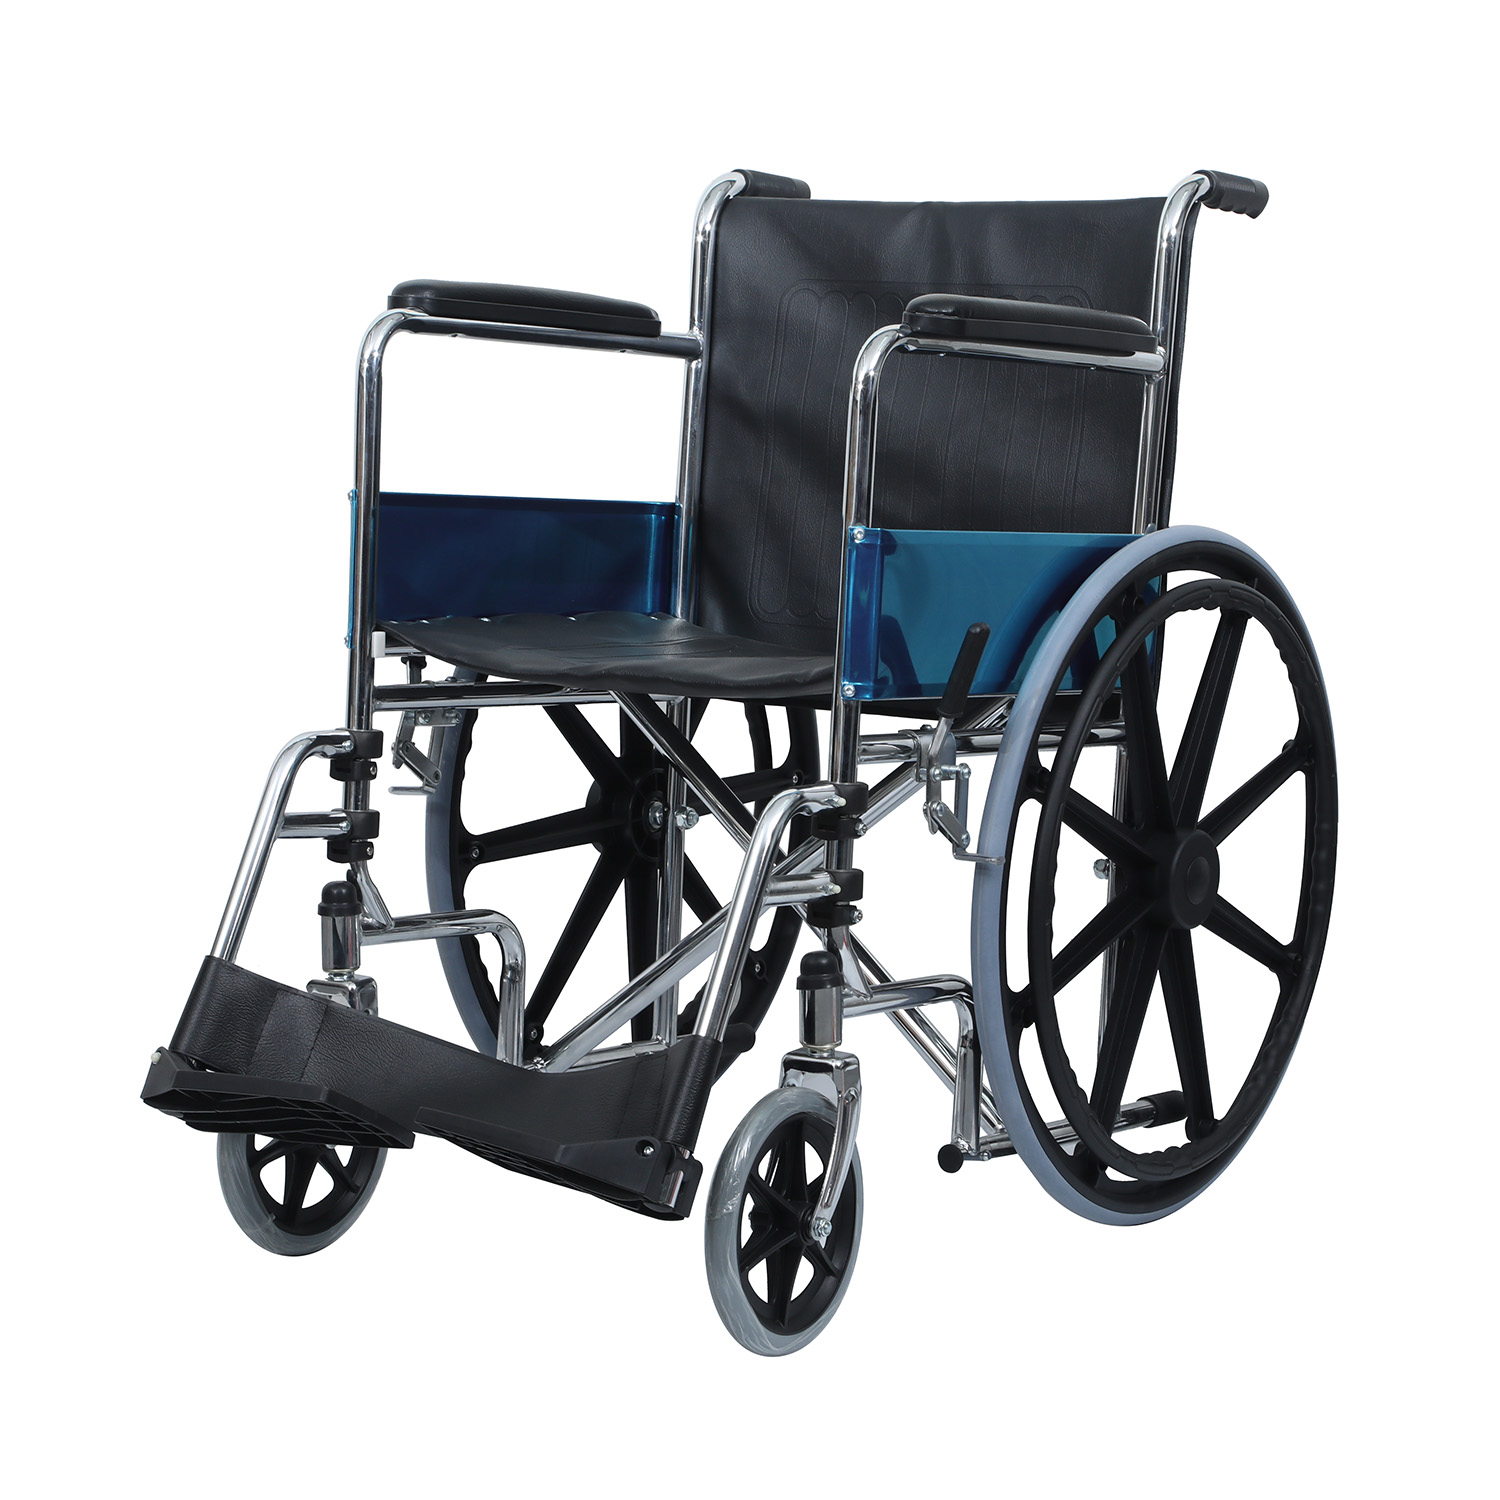 Care and maintenance of manual wheelchairs